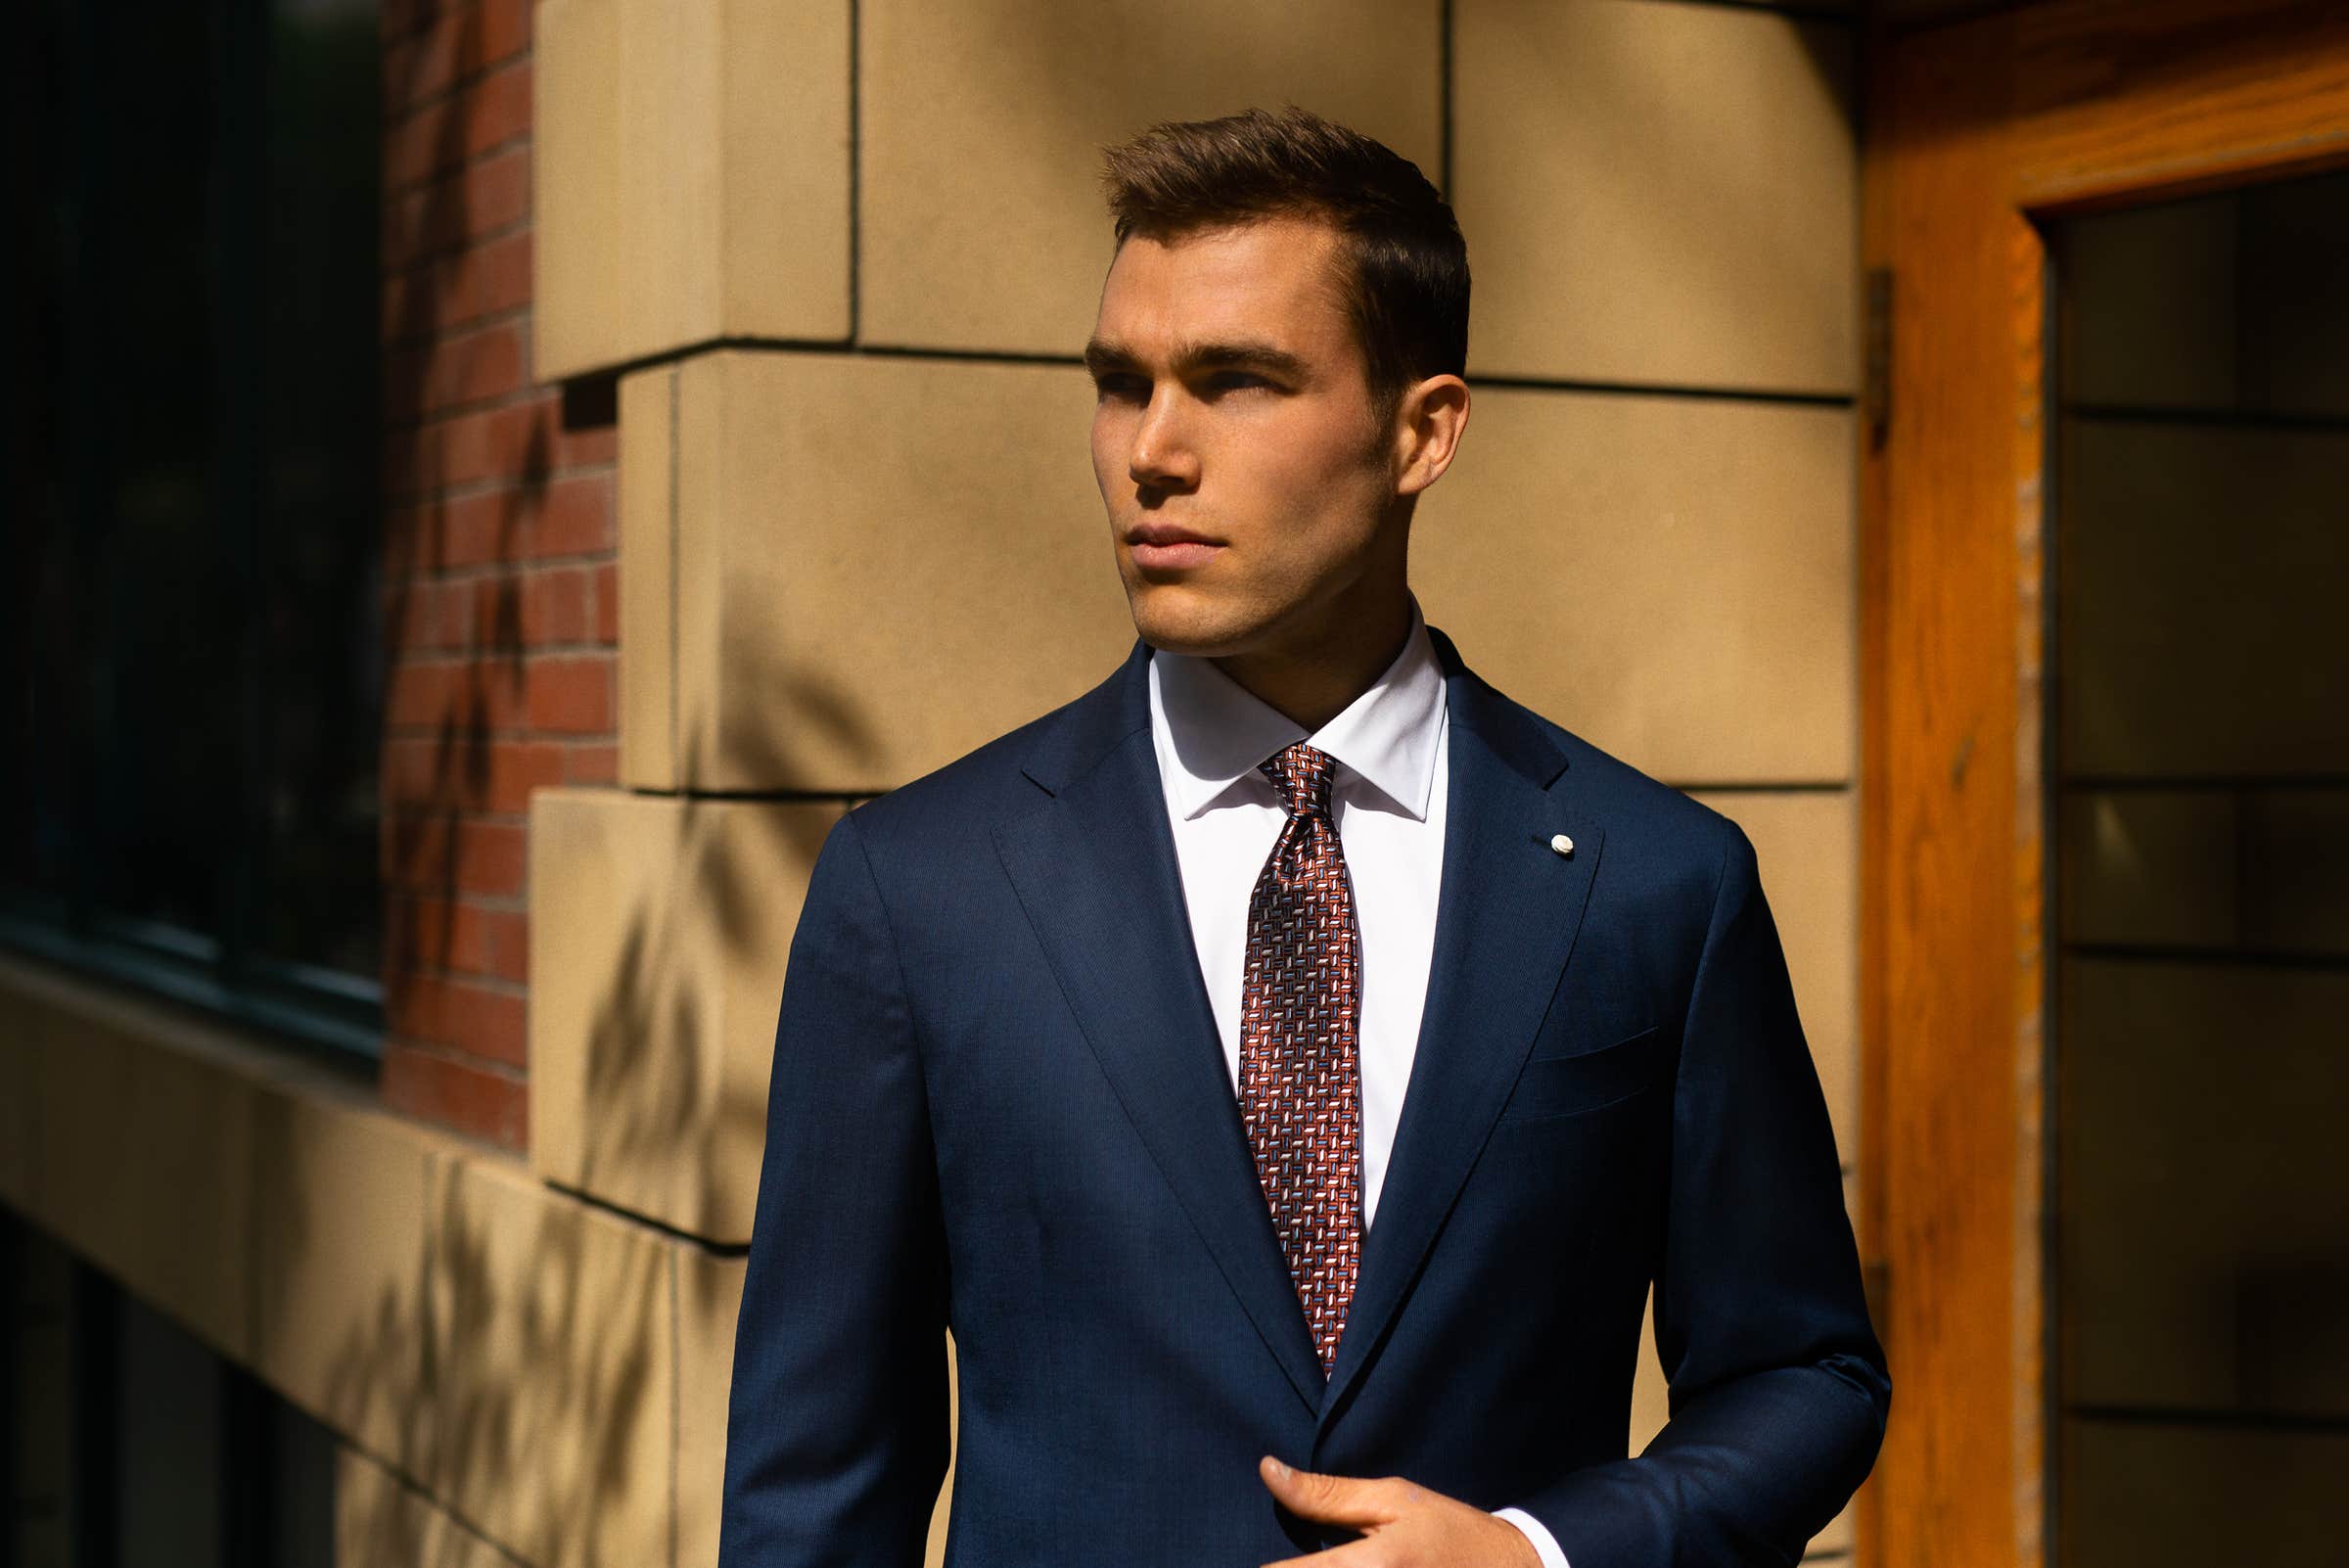 Men’s Style Glossary - Suit Terms Defined